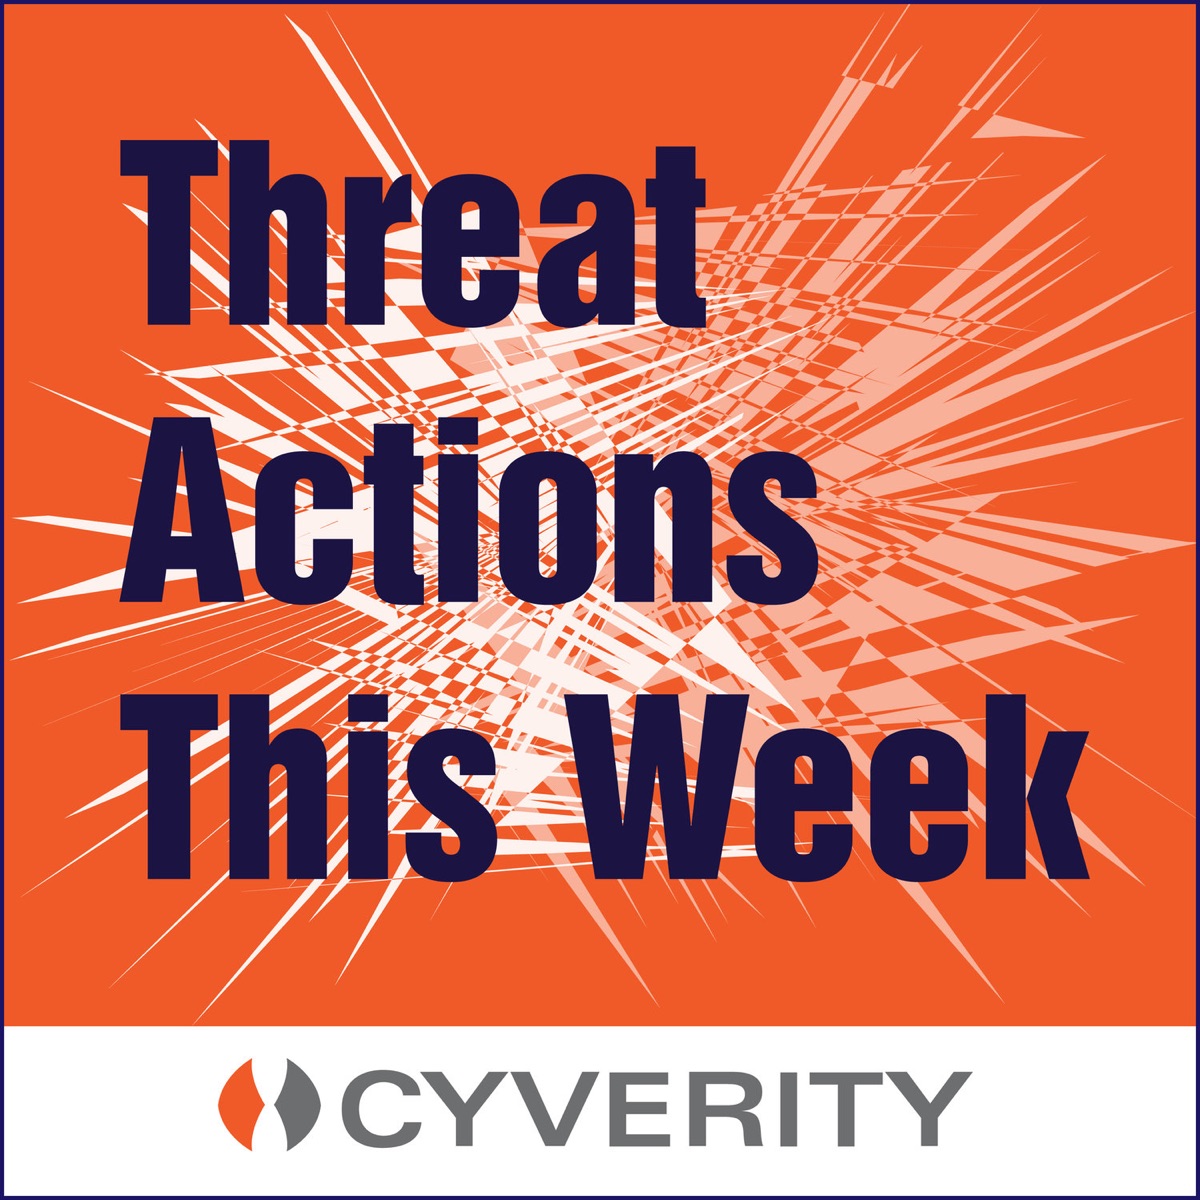 Threat Actions This Week | DevSecOps: Developers play security offense